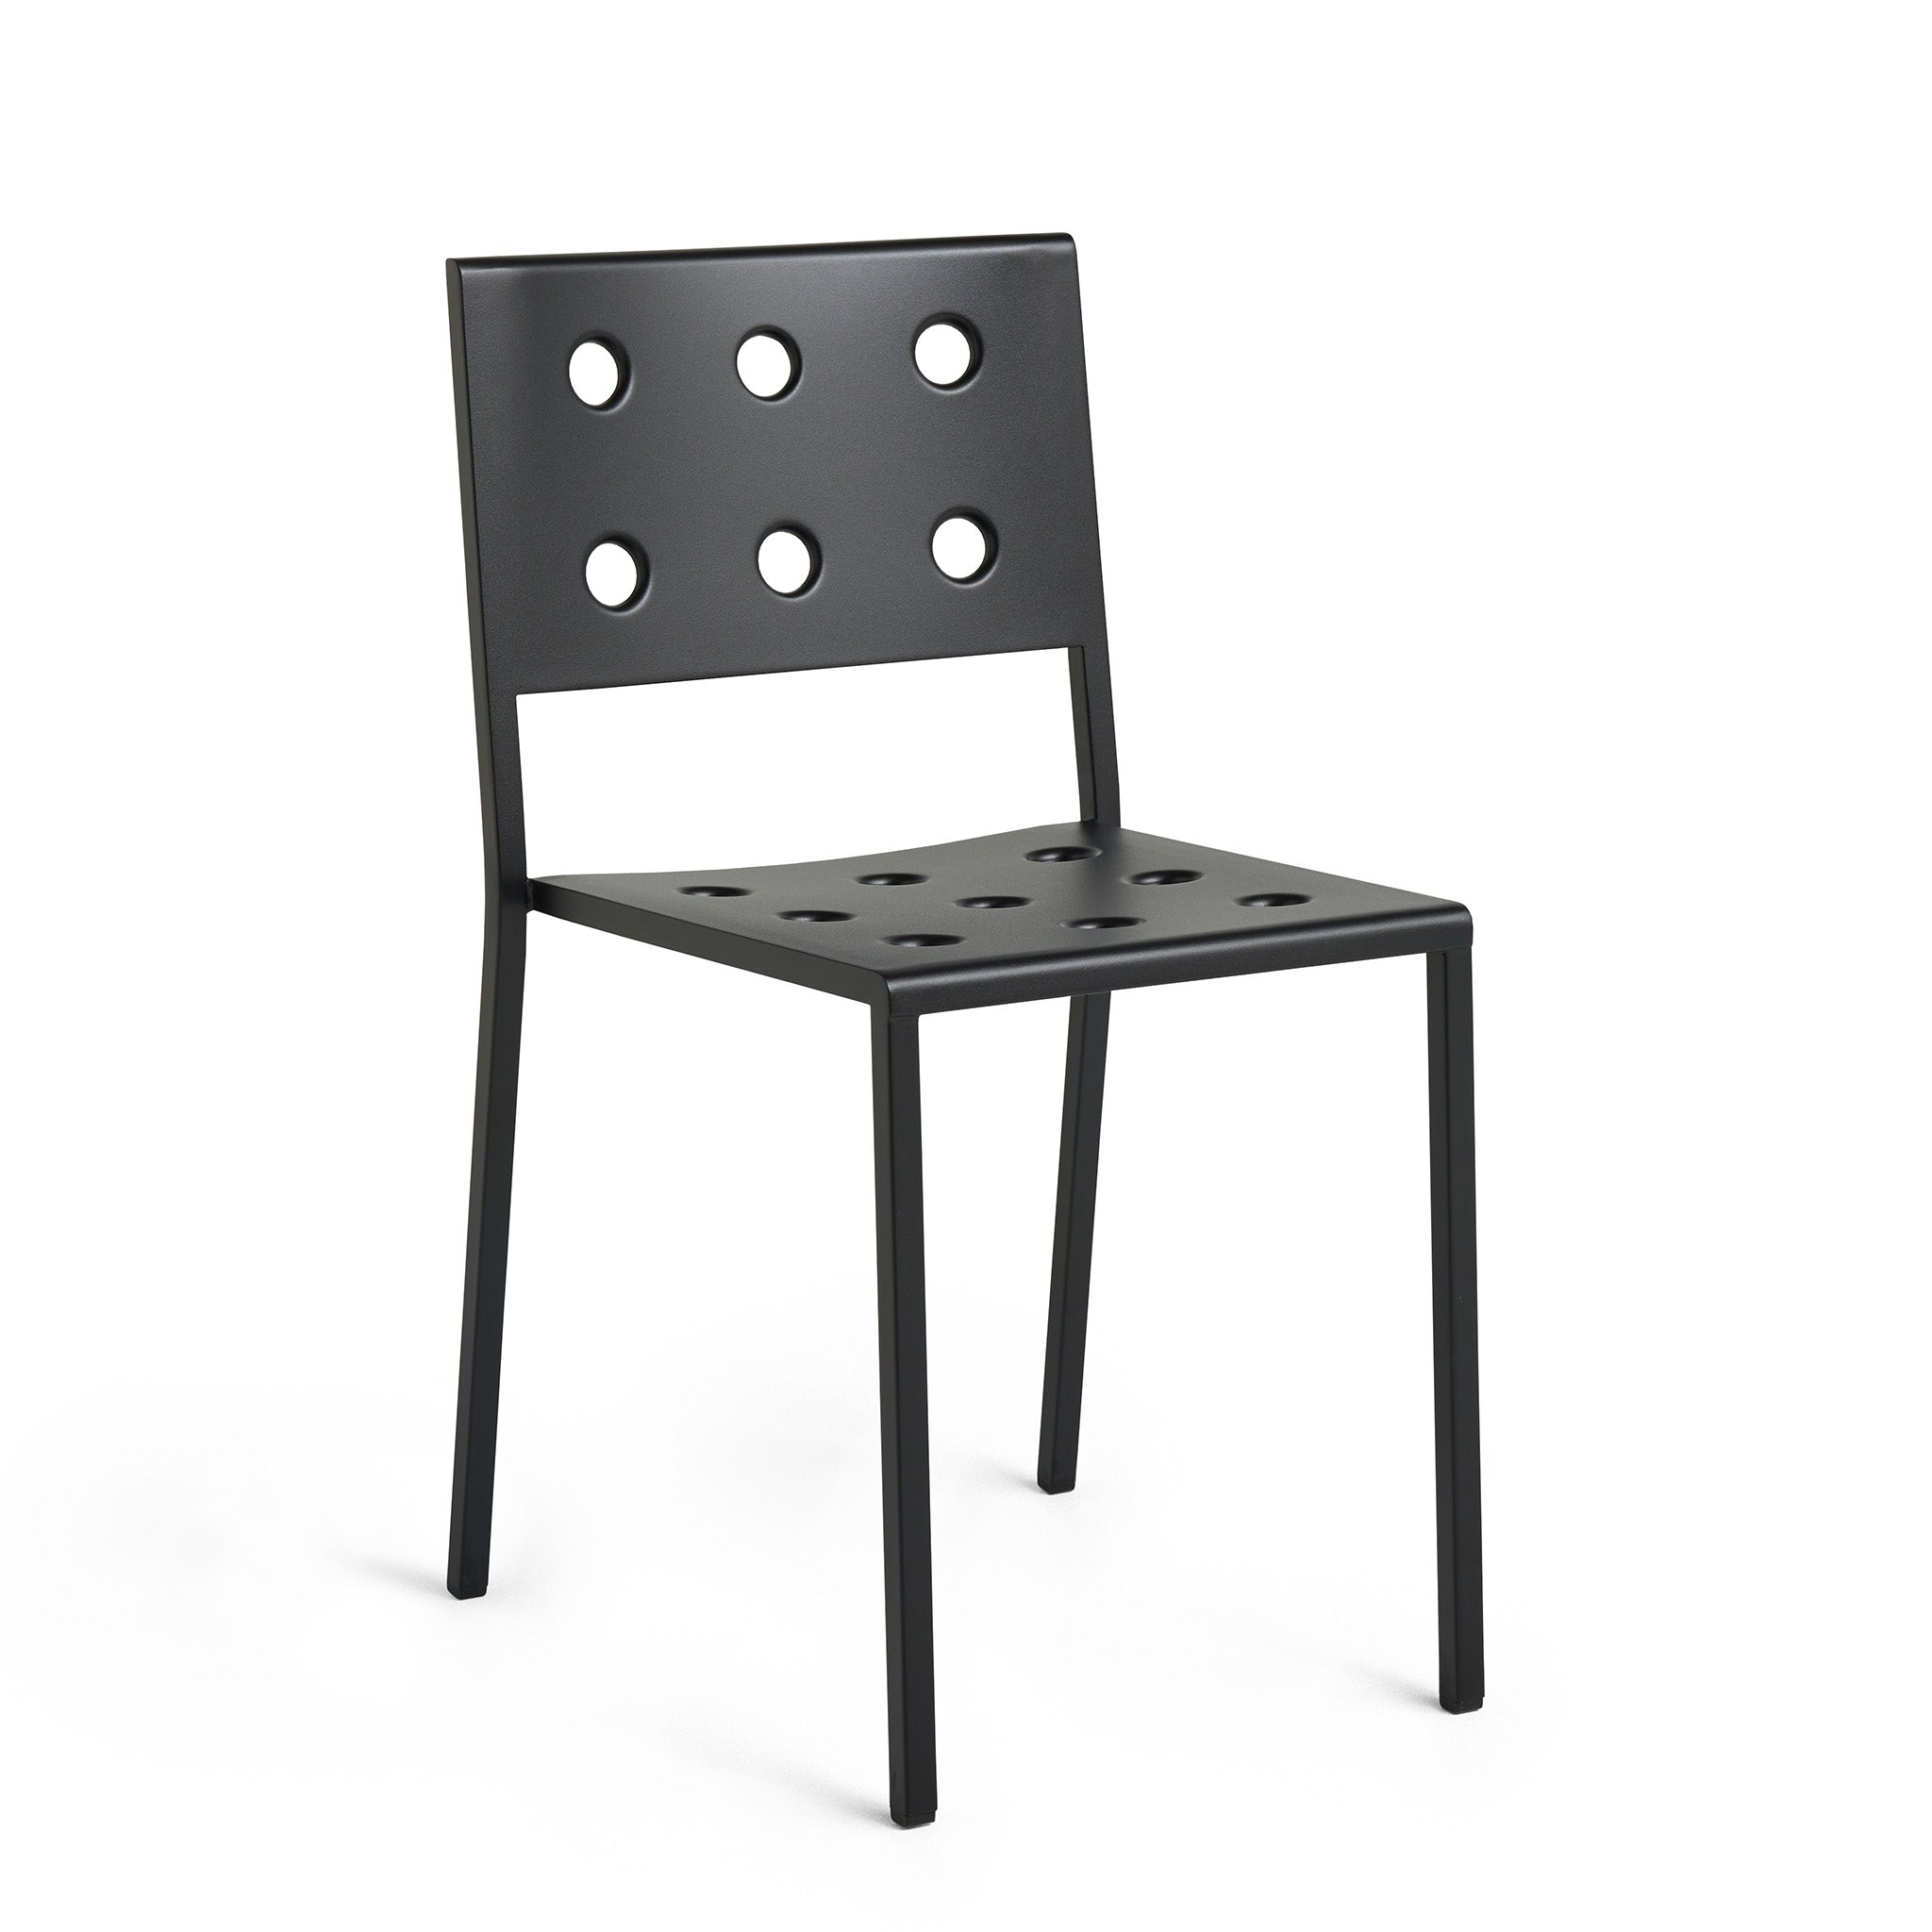 Balcony Dining Chair By Ronan and Erwan Bouroullec for Hay